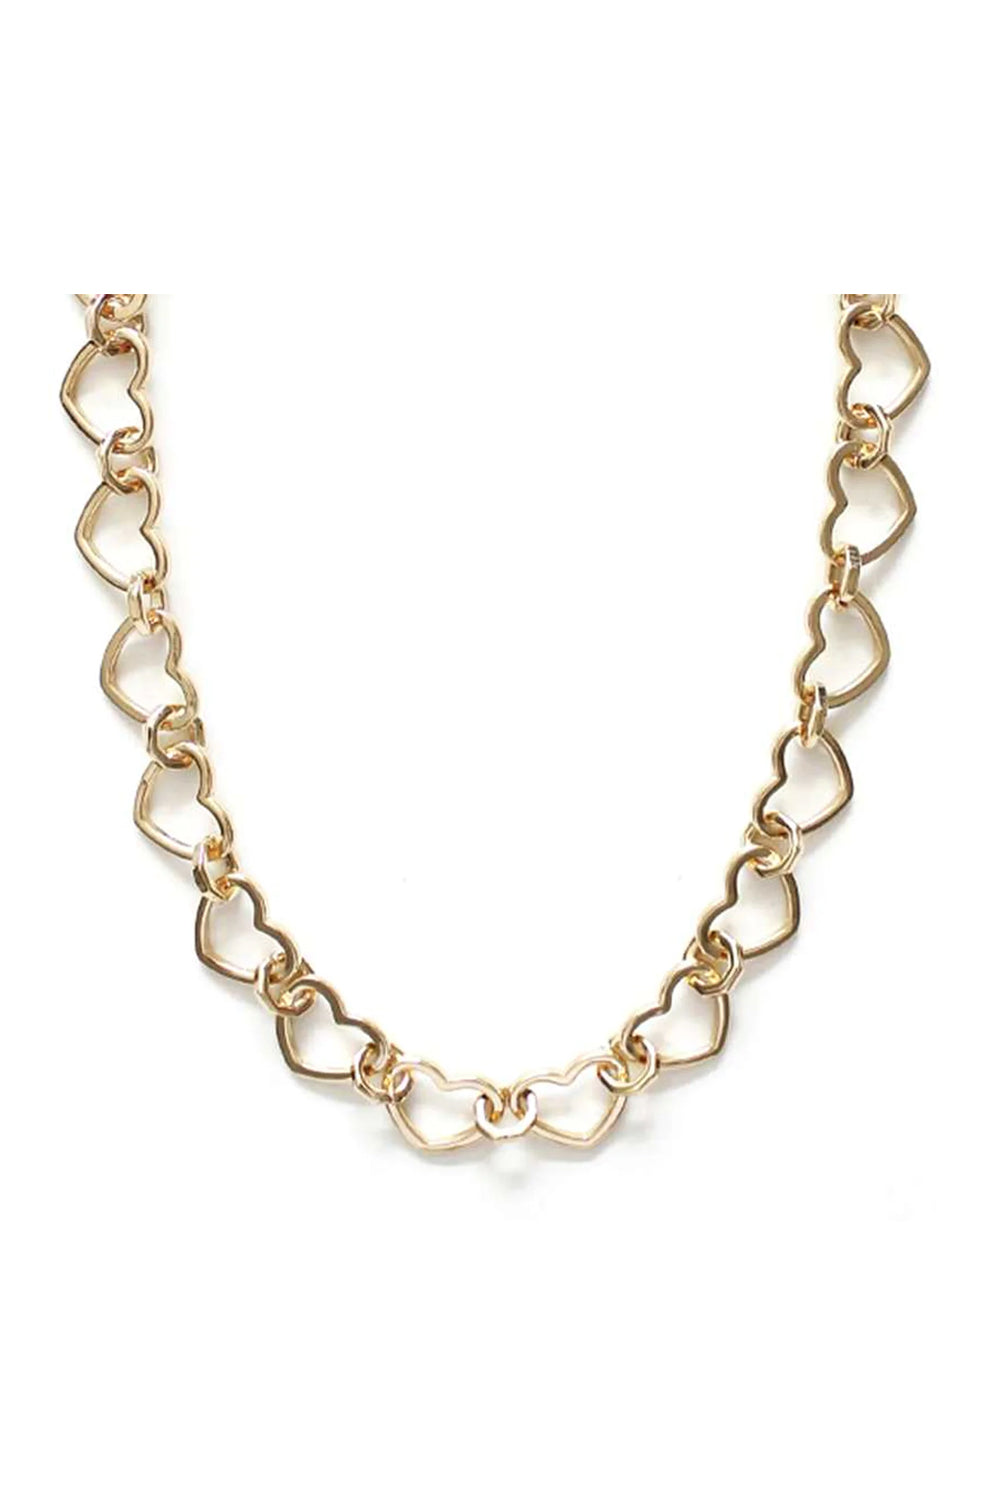 Gold Metal Heart Link Chain Necklace